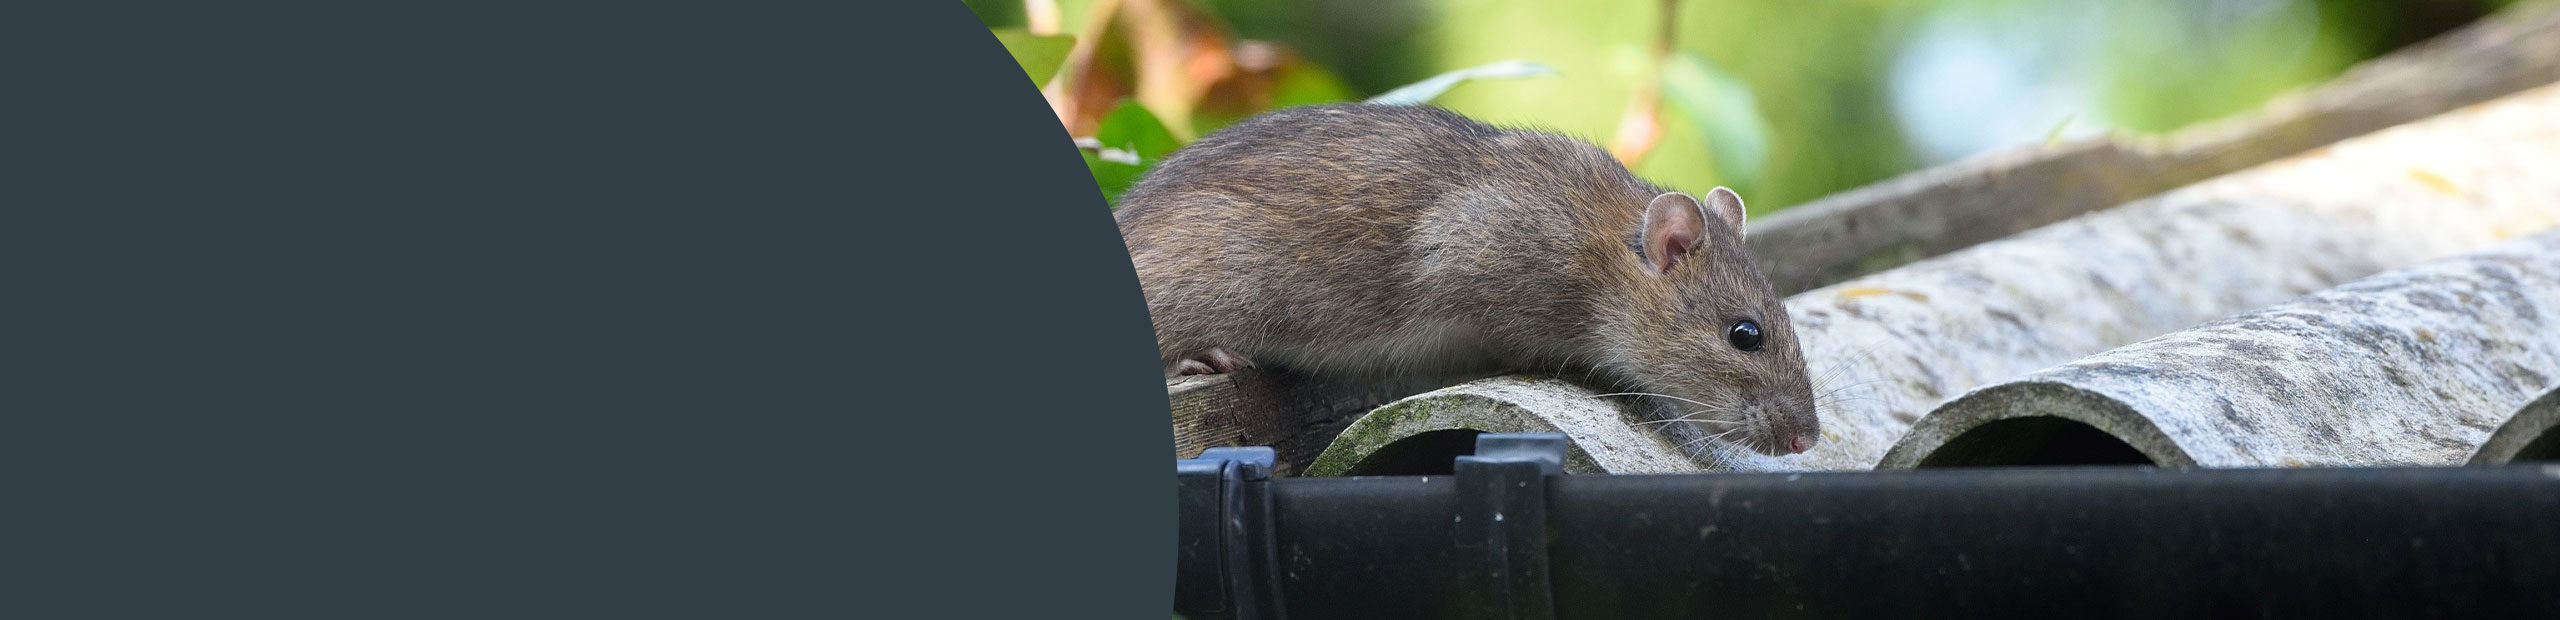  Rodent Removal Services - Westminster